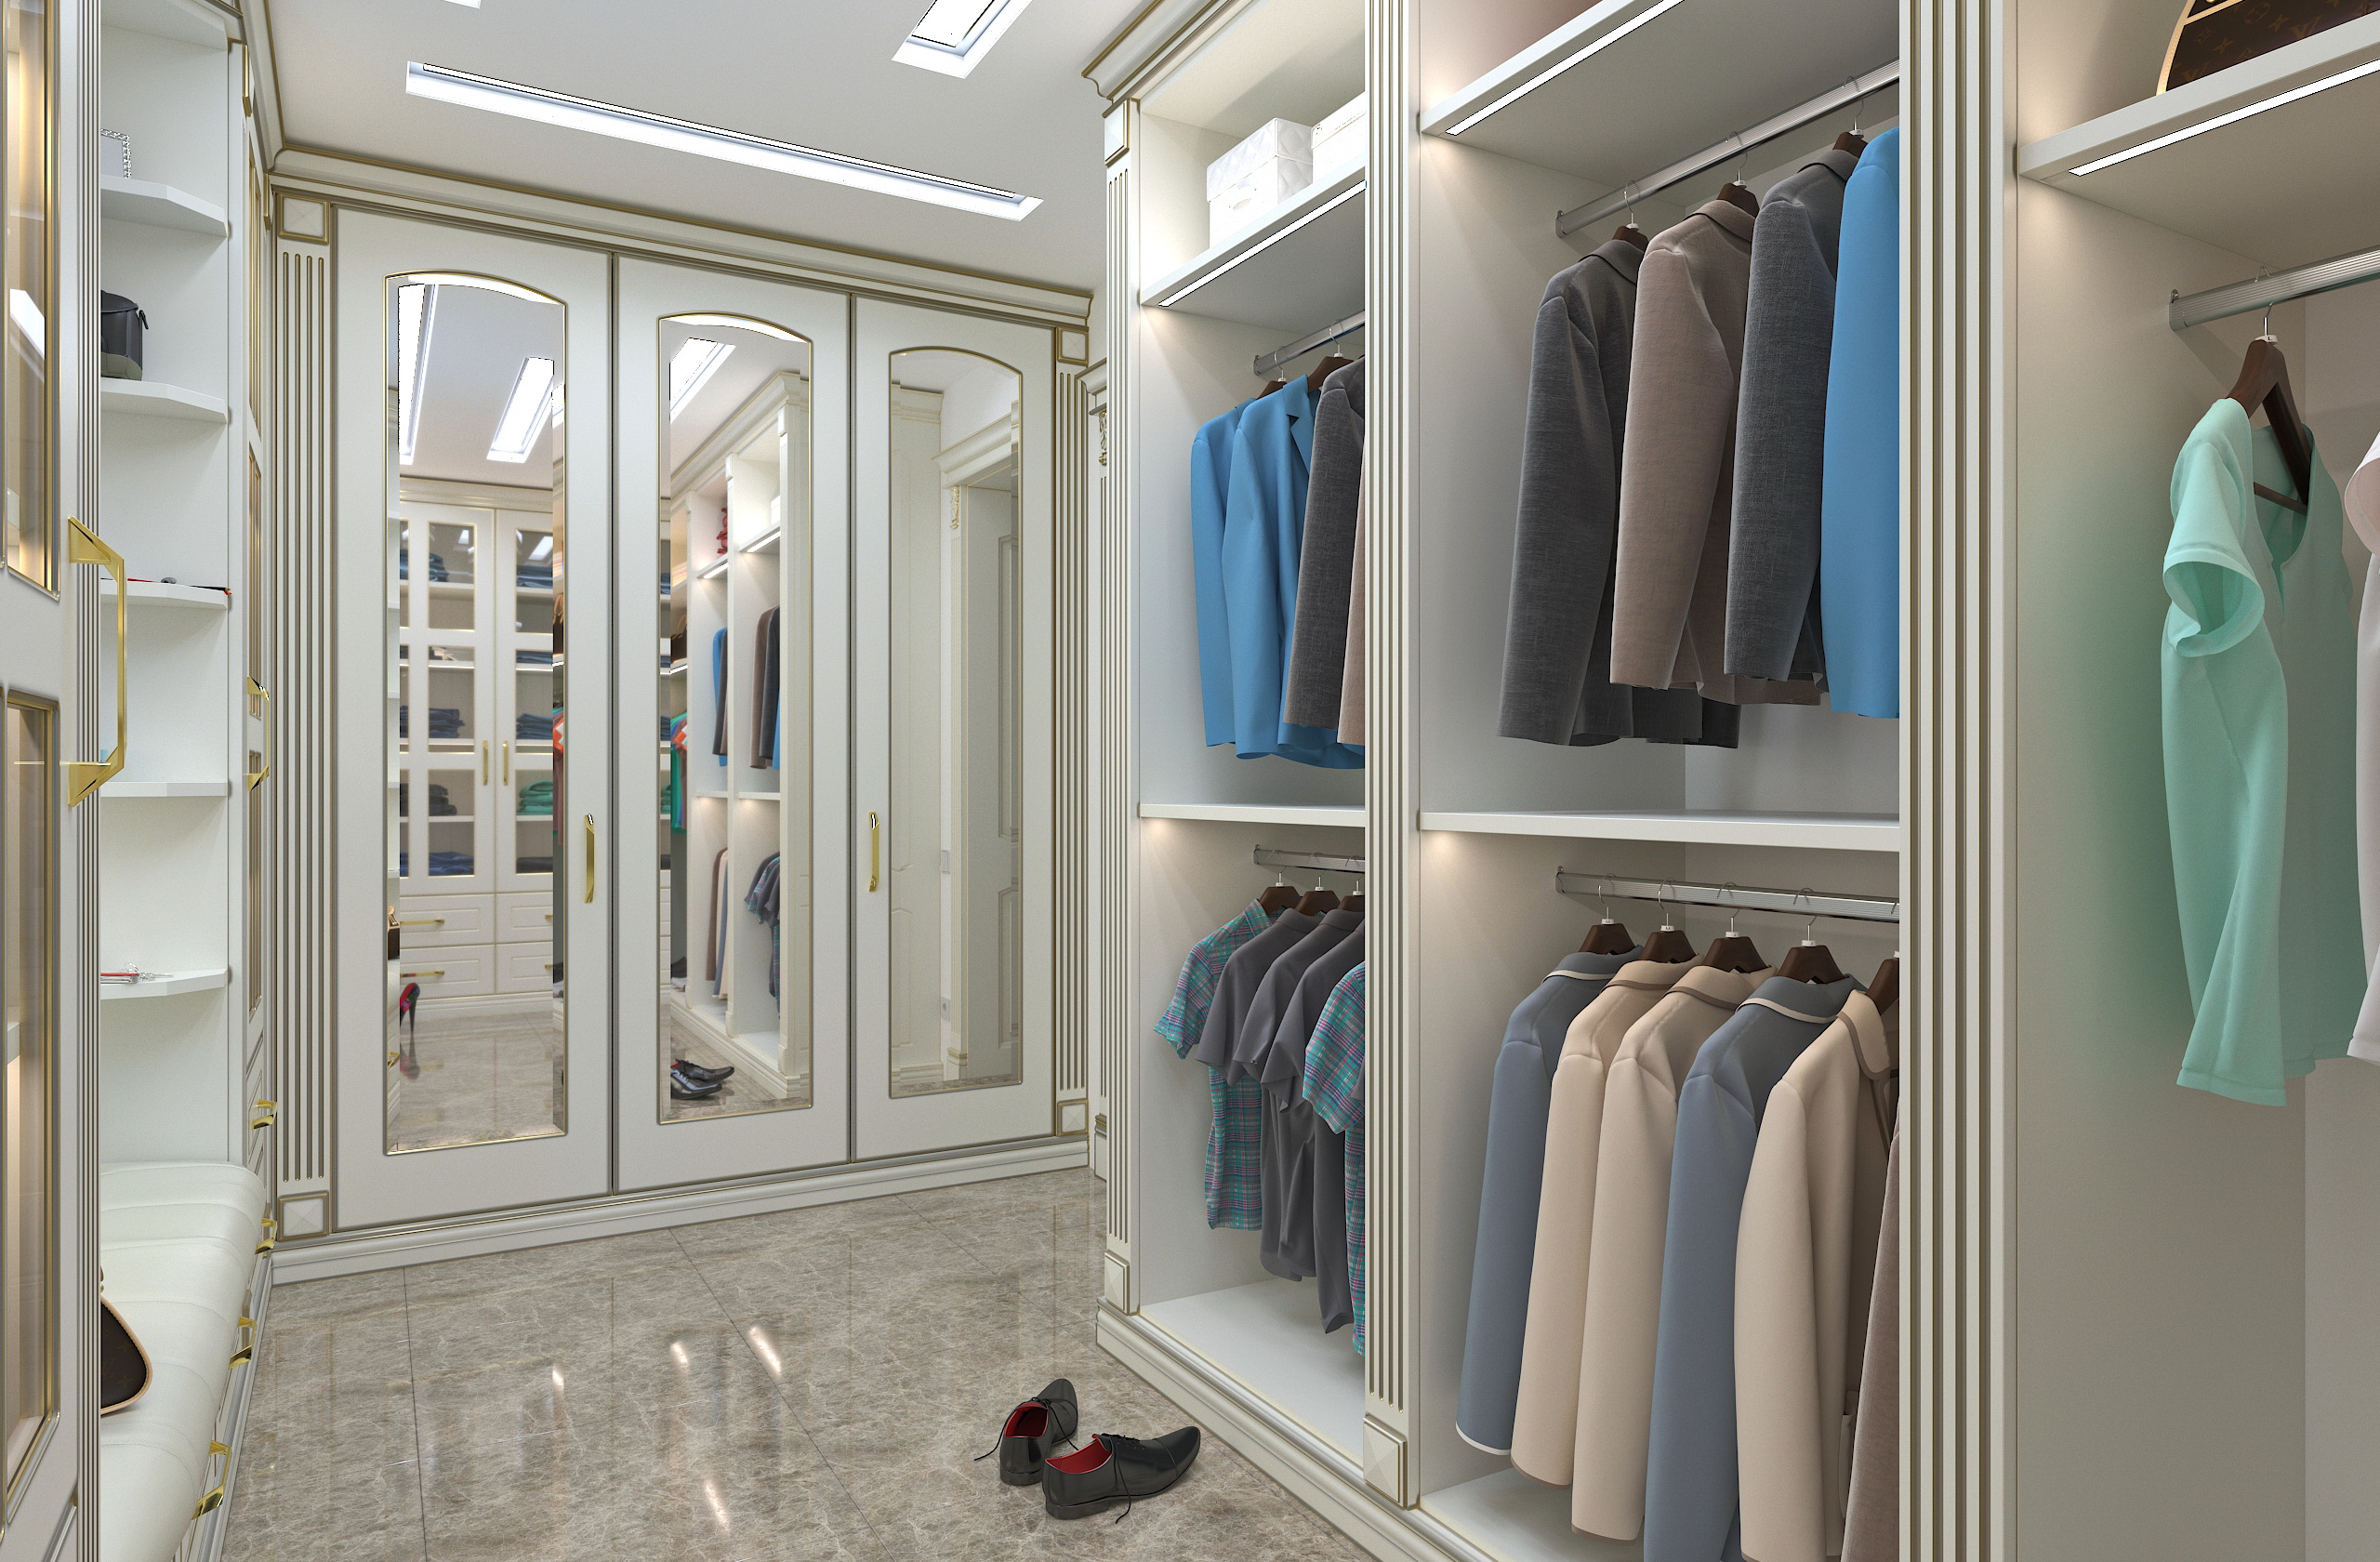 Cloakroom in a classic style in SolidWorks vray 3.0 image